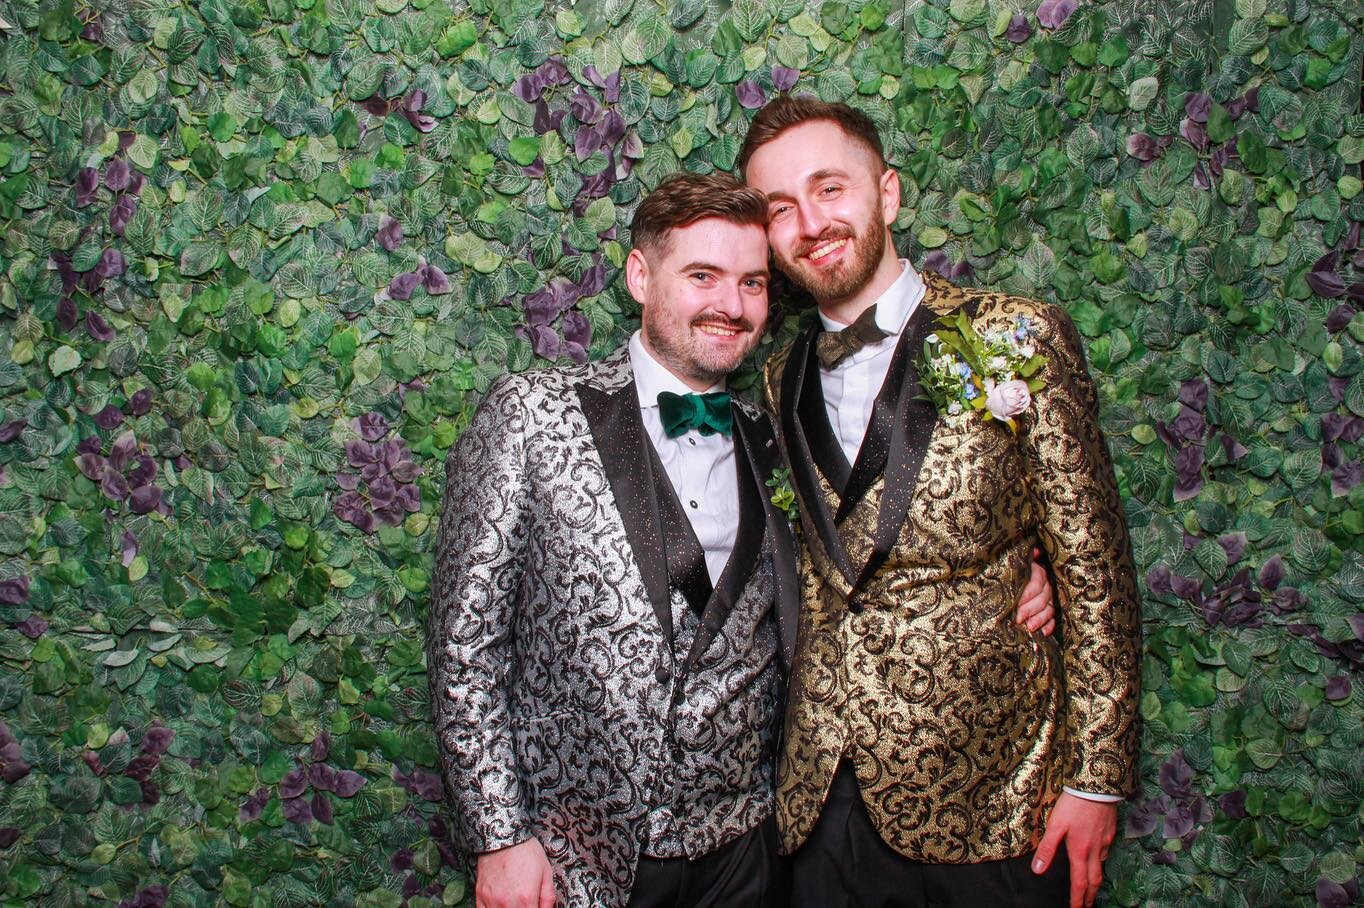 Another huge congratulations to Alex &amp; Matt! Last Saturday these love birds tied the knot at @foxtailbarnsvenue and we were delighted to attend and take 250 brilliant photos for them 👏🏻

#foxtailbarns #ohphotobooth #photobooth #partybooth #wedd